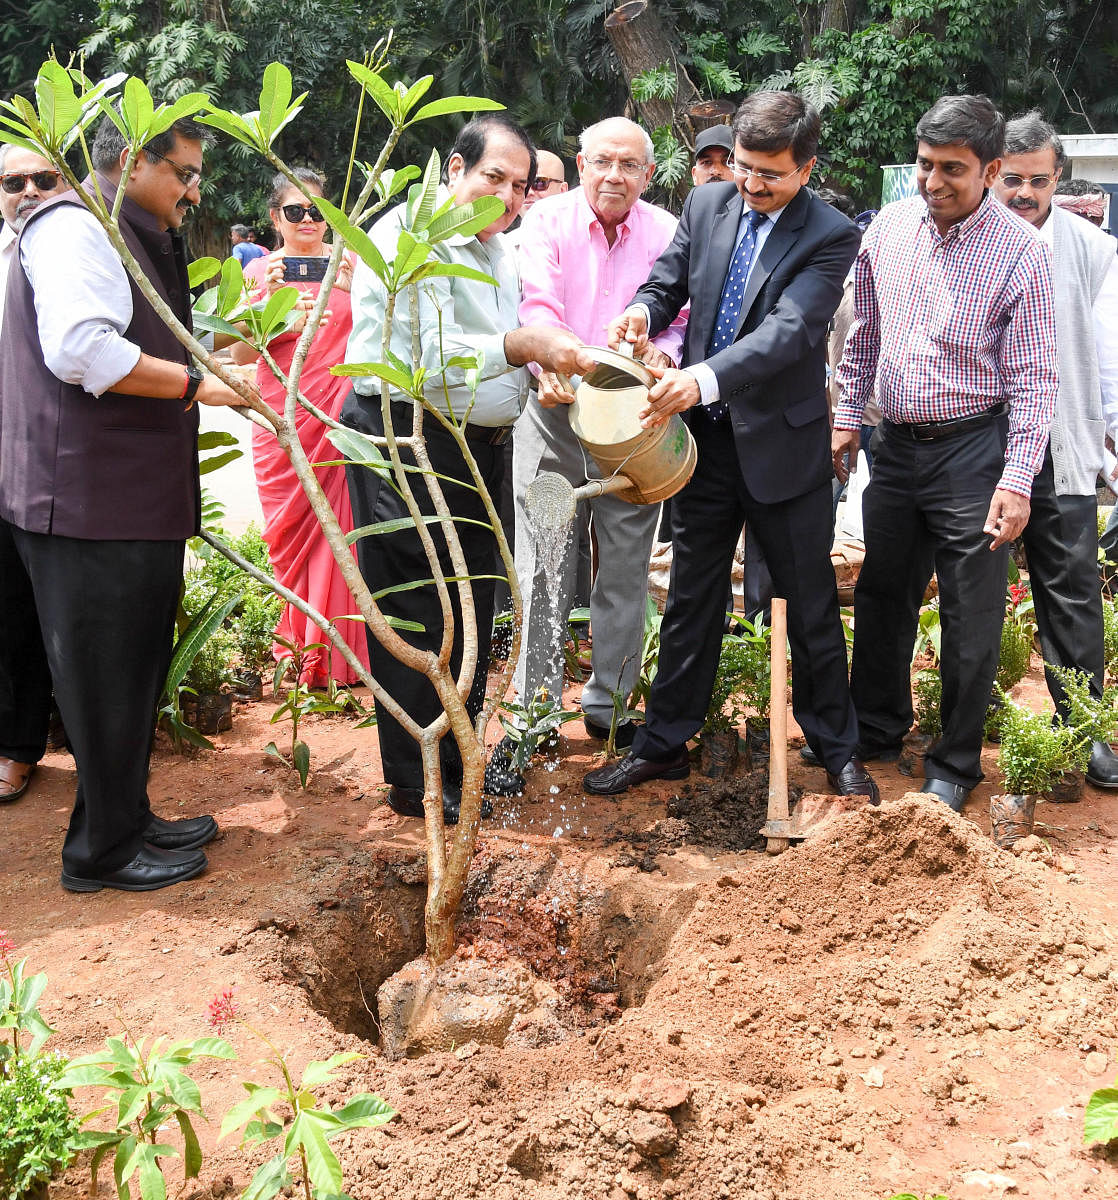 Arjun Menda, Chairman, Menda Foundation and Dr Ramachandra, Director Kidwai Institute of Oncology, are  plant a sapling in the premises of Kidwai Memorial Oncology Institute. Photo/ B H Shivakumar